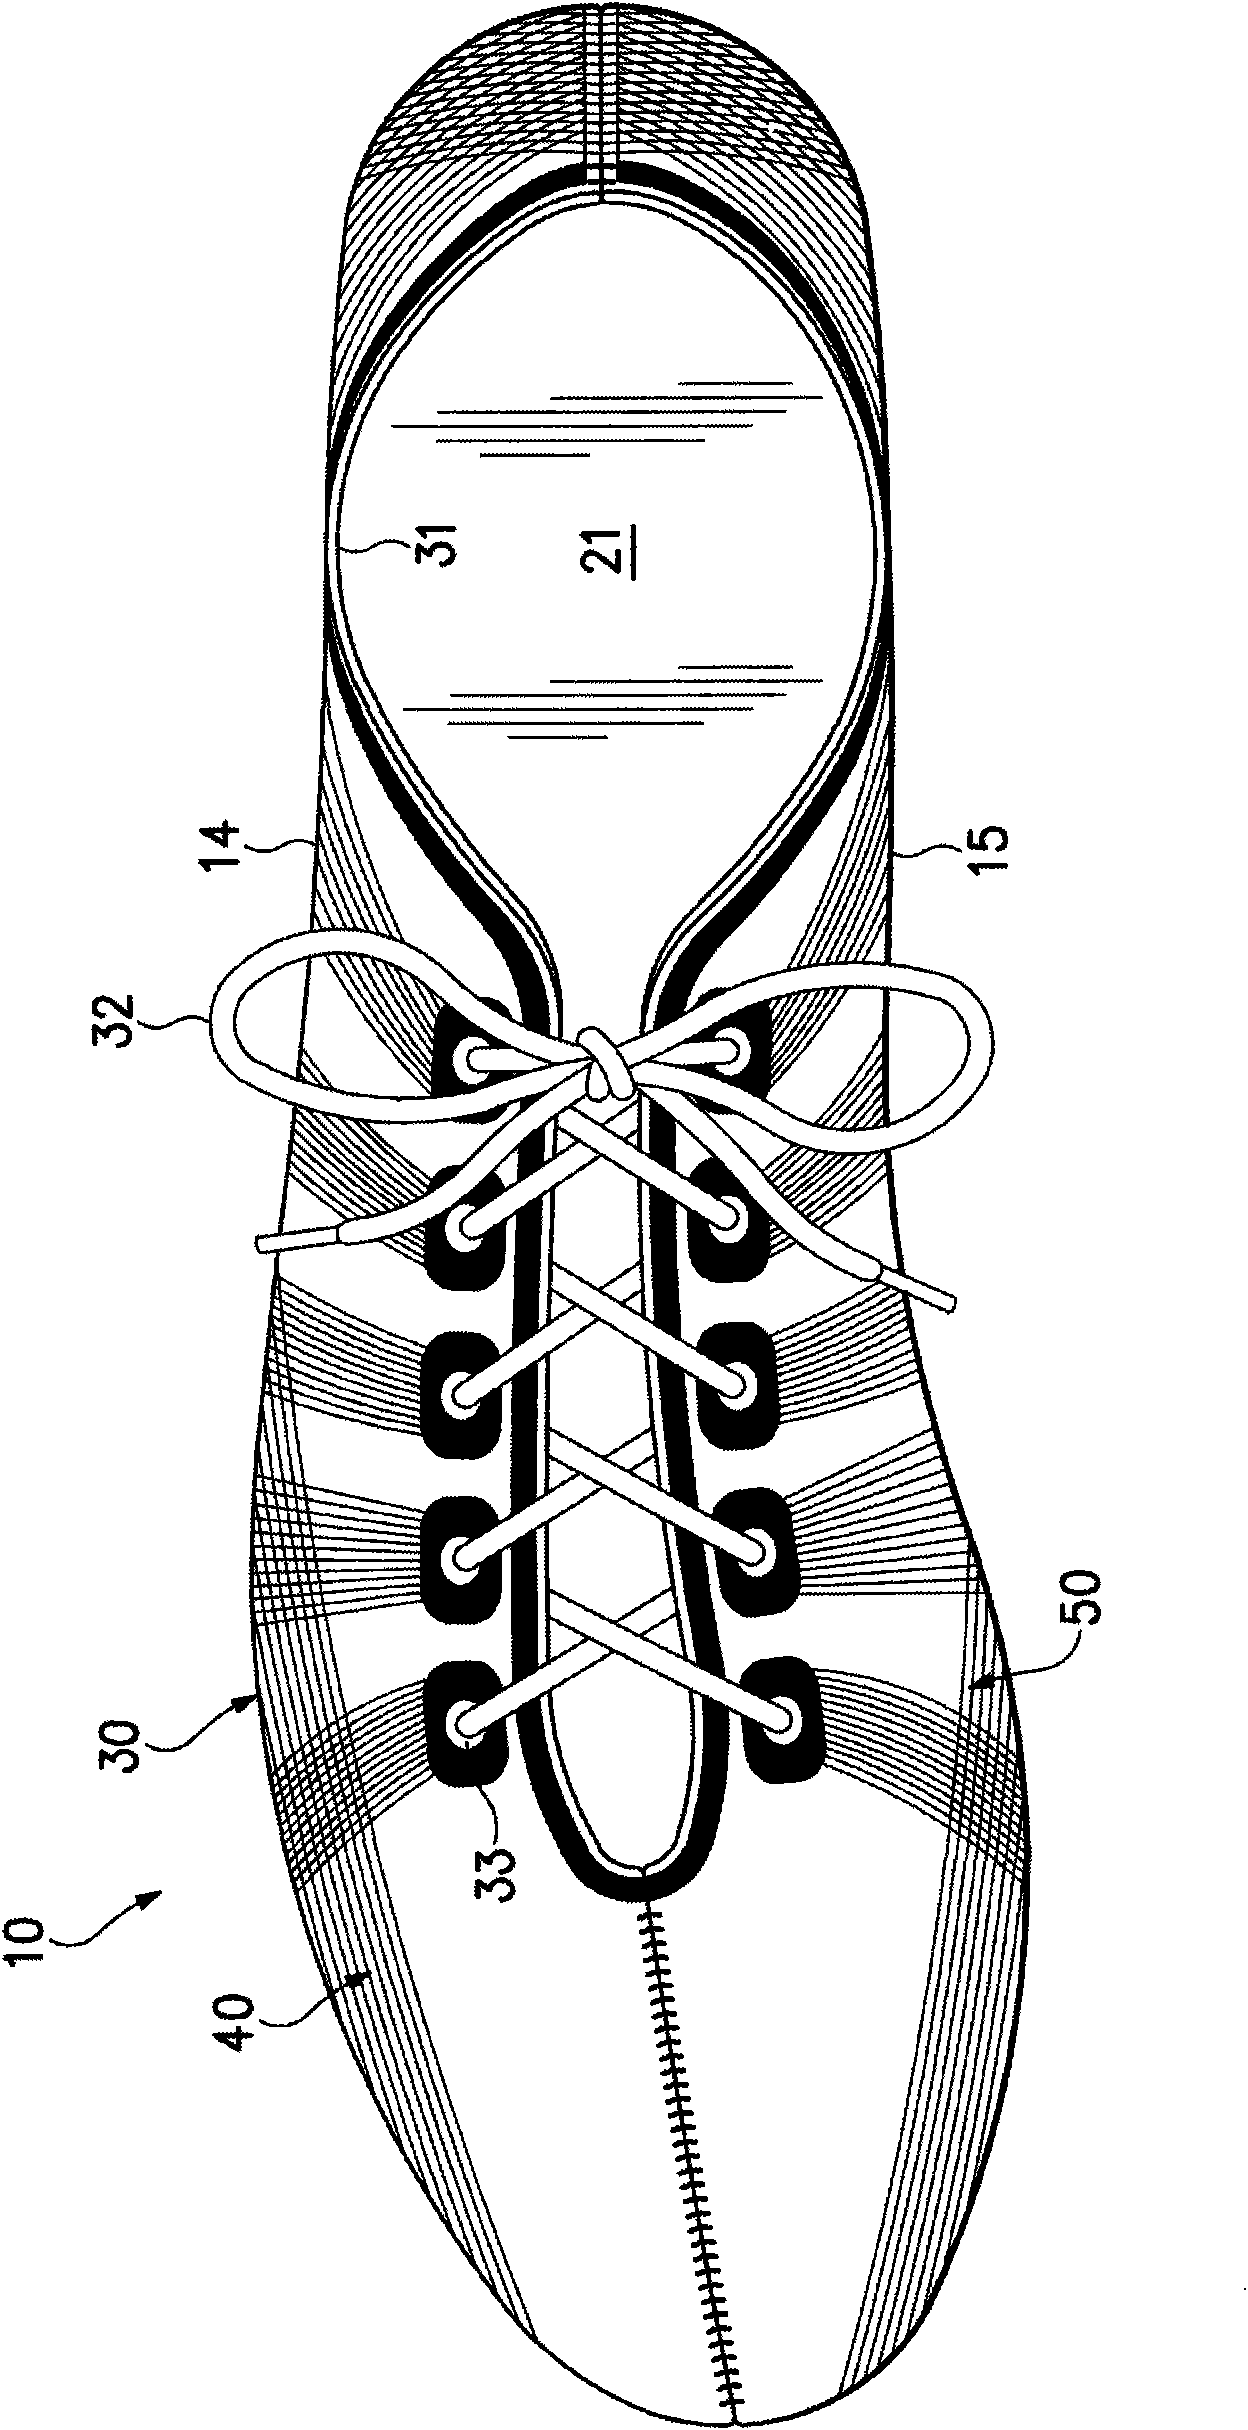 Composite element with a polymer connecting layer